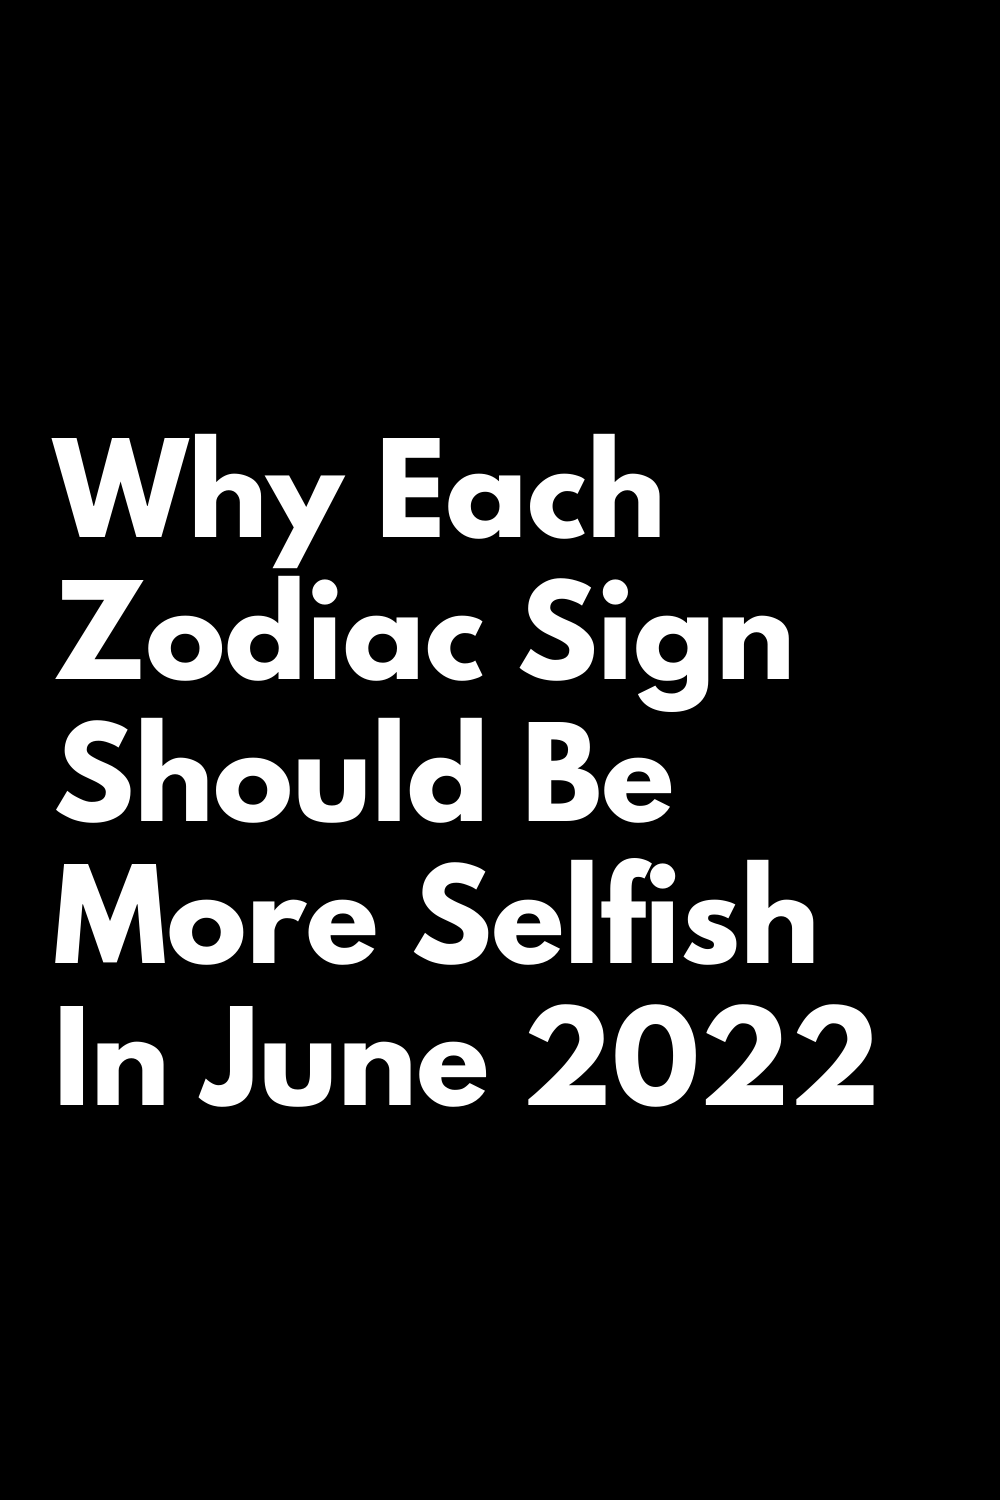 Why Each Zodiac Sign Should Be More Selfish In June 2022 | zodiac Signs